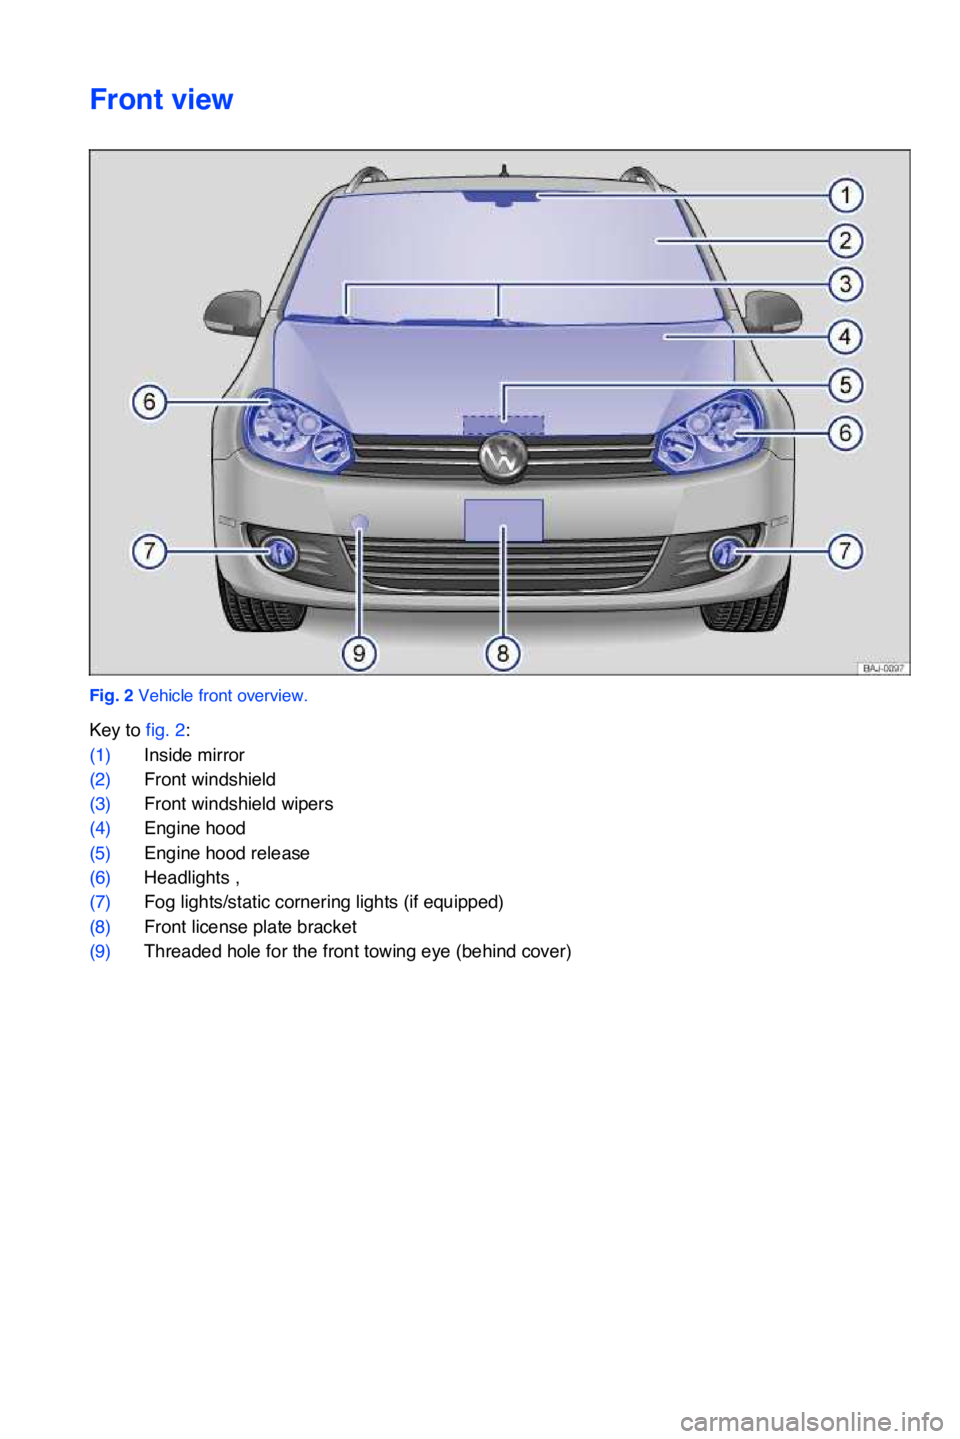 VOLKSWAGEN JETTA SPORTWAGEN 2013  Owners Manual Front view
Fig. 2 Vehicle front overview.
Key to fig. 2:
(1)Inside mirror 
(2)Front windshield
(3)Front windshield wipers 
(4)Engine hood 
(5)Engine hood release 
(6)Headlights , 
(7)Fog lights/static